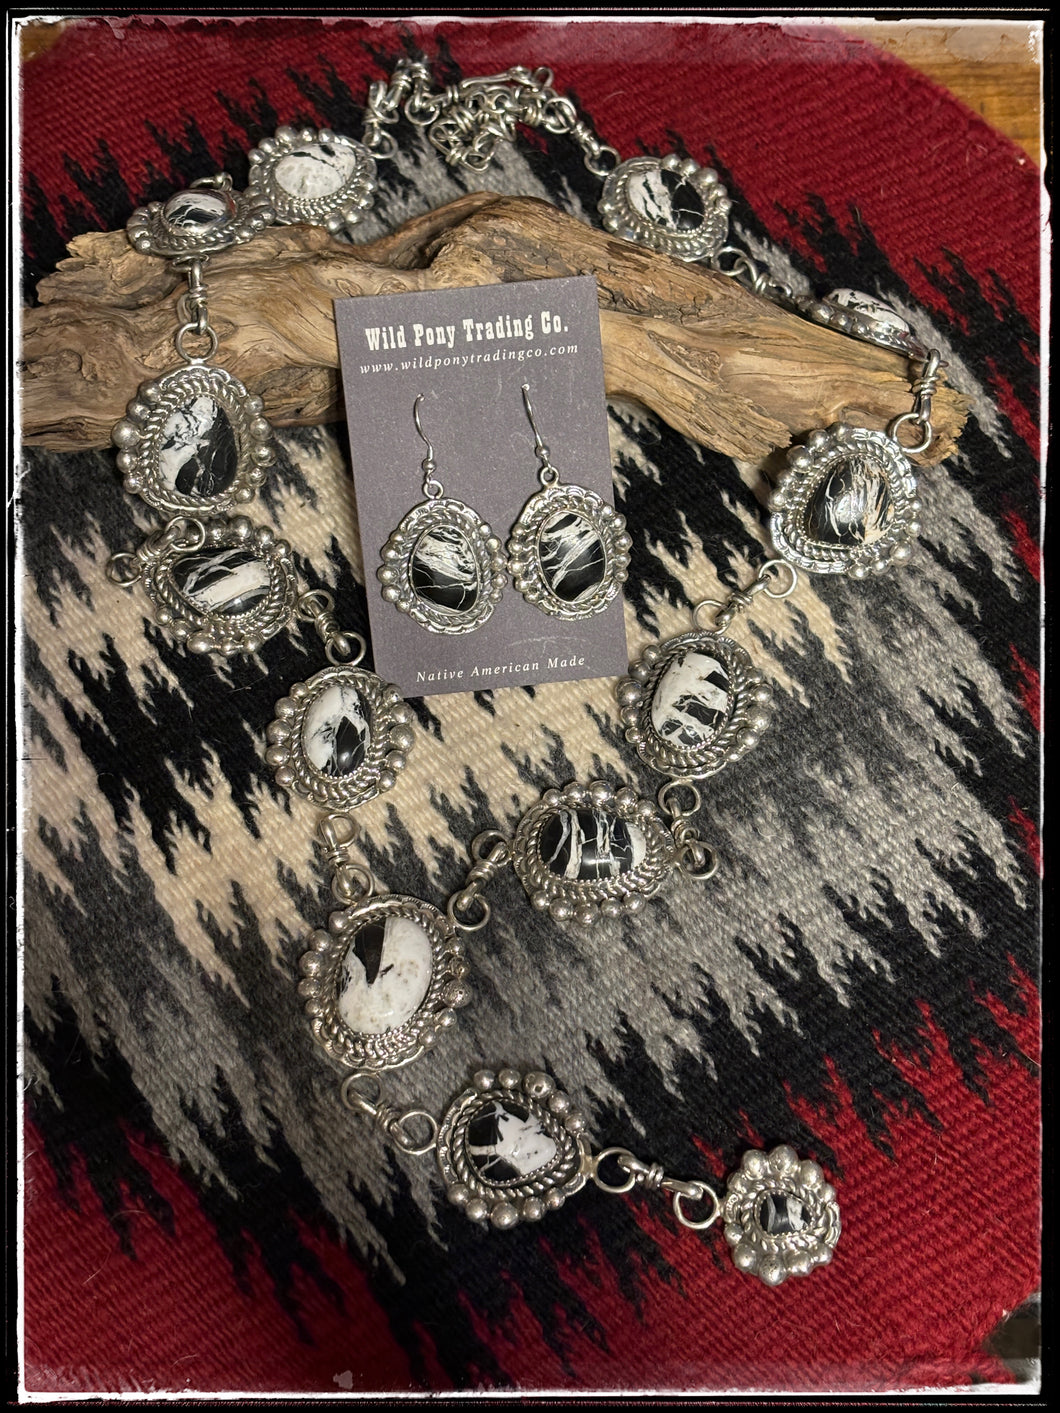 San Felipe silversmith Jacob Troncosa, sterling silver and White Buffalo lariat Y necklace set with matching earrings